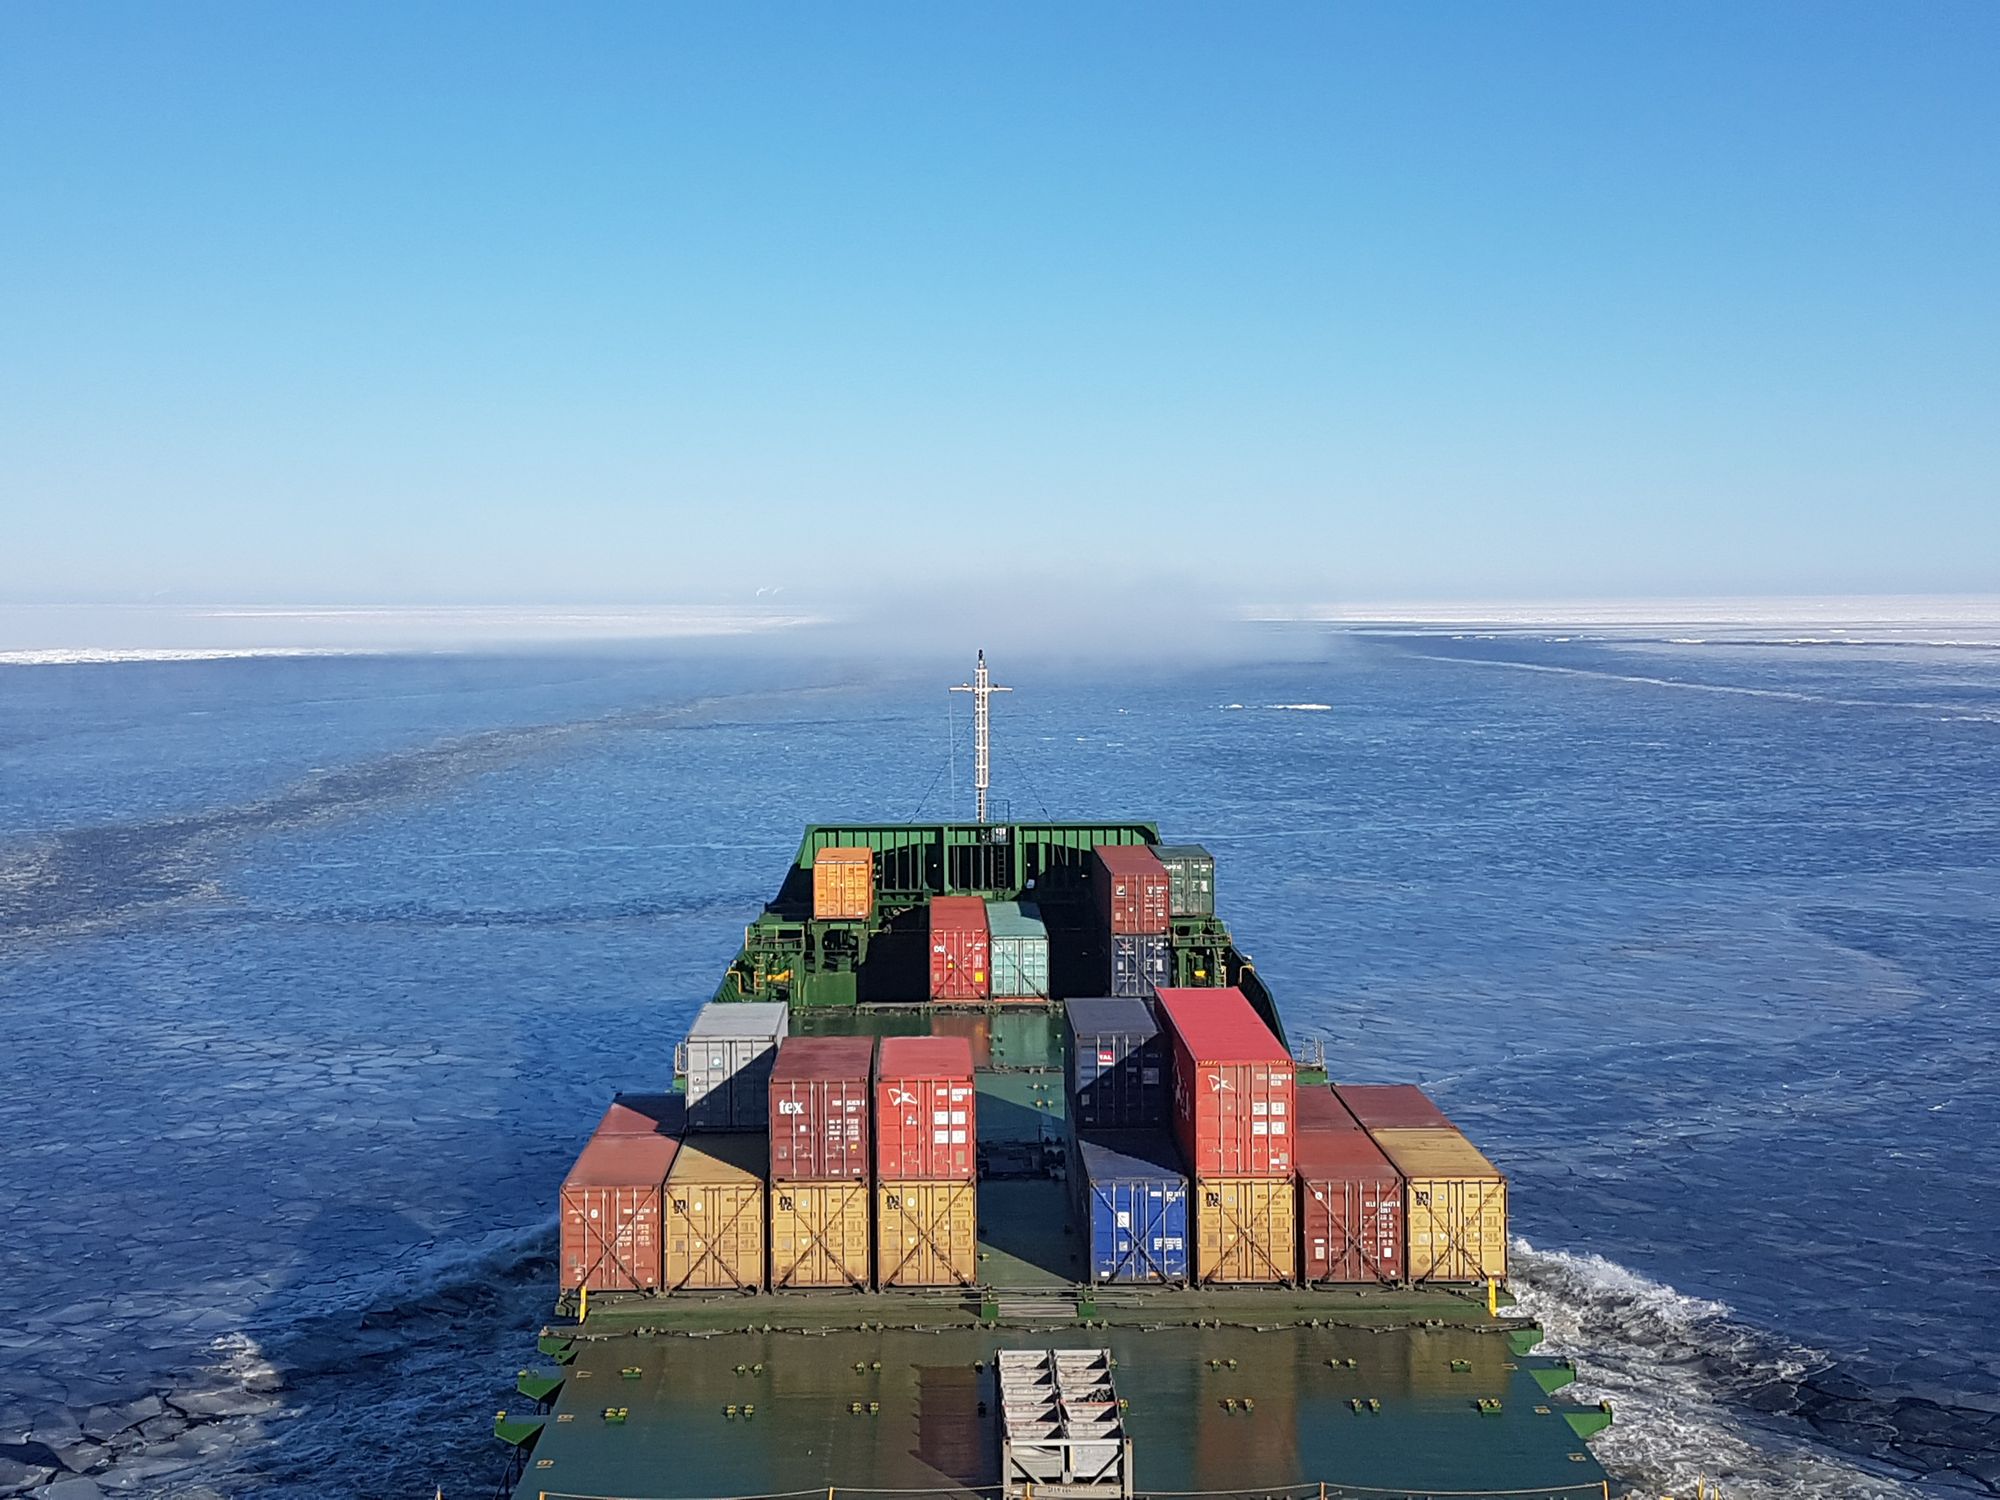 View from the bridge overlooking a container ship's deck